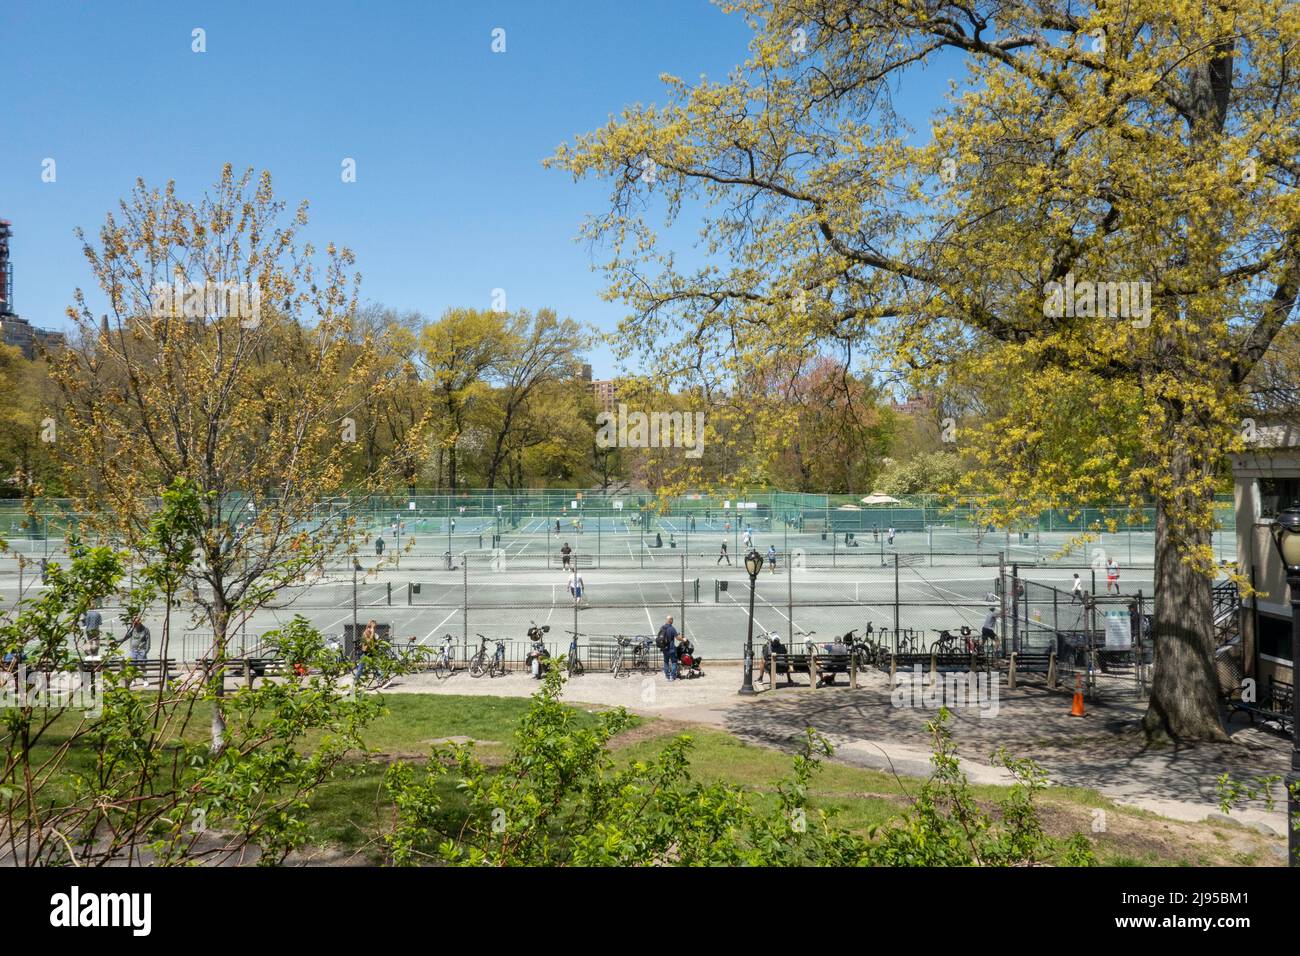 Players enjoying a spring afternoon at Central Park Tennis Center in New York City, USA  2022 Stock Photo